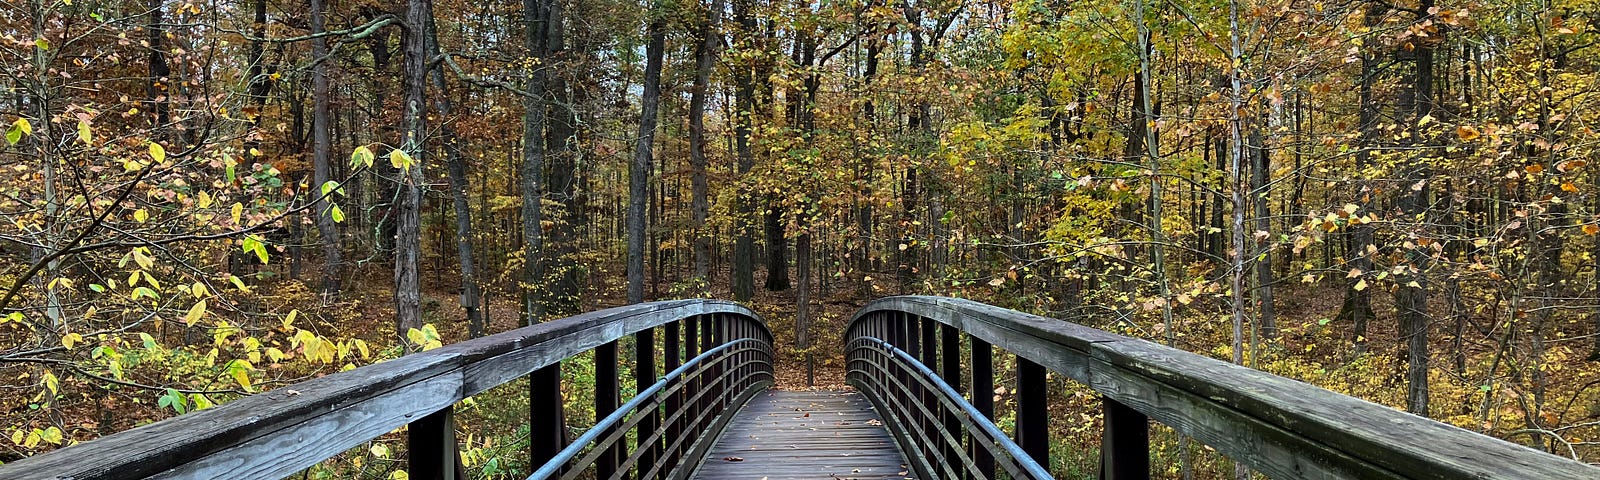 A wooden footbridge with rails on both sides and some leaves on the path crosses over a ravine through autumn forest.